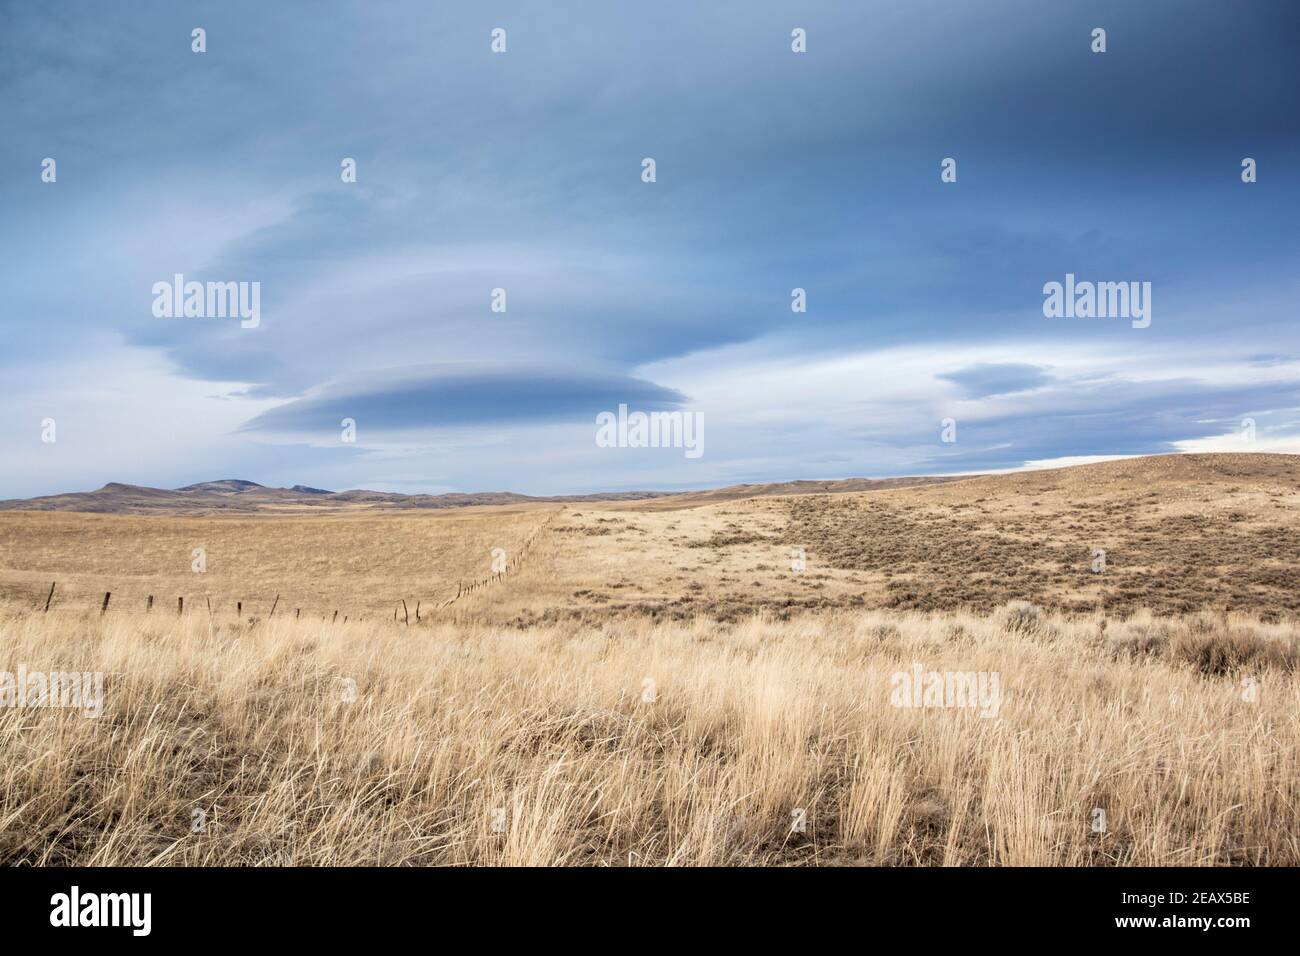 Lenticular clouds over the rolling landscape, near Milligan Canyon, in Jefferson County, Montana Stock Photo